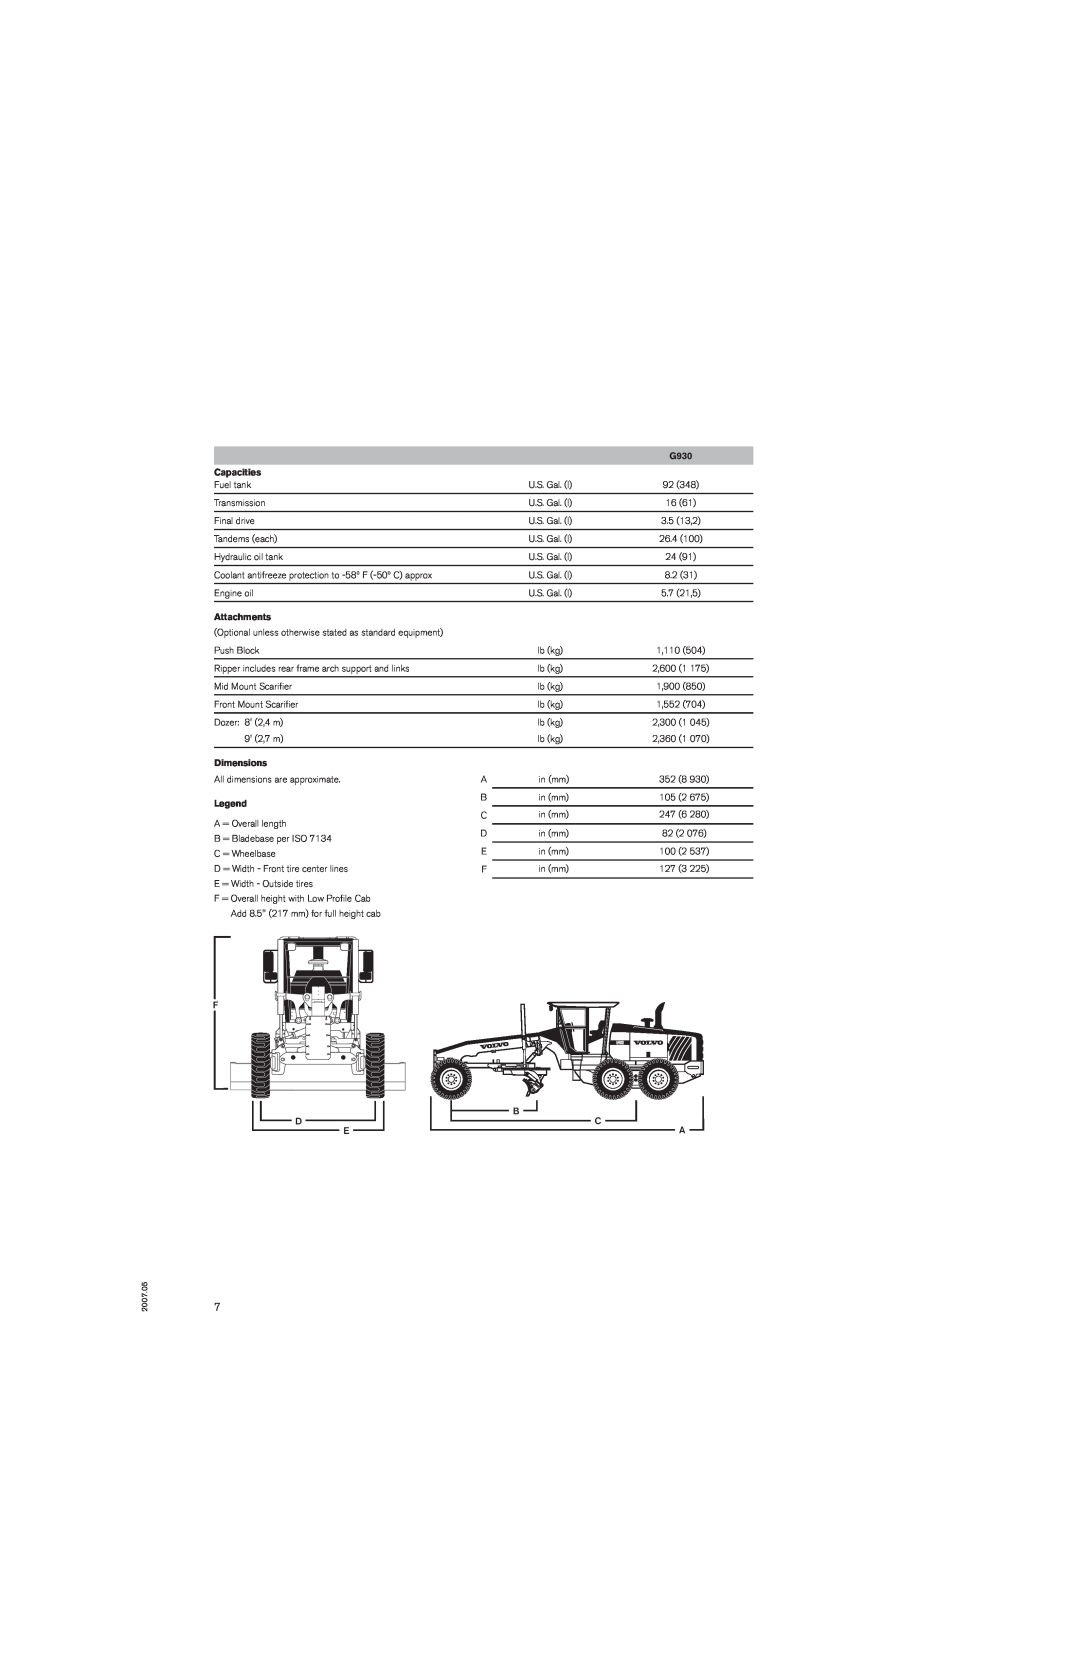 Volvo G930 manual Capacities, Attachments, Dimensions 